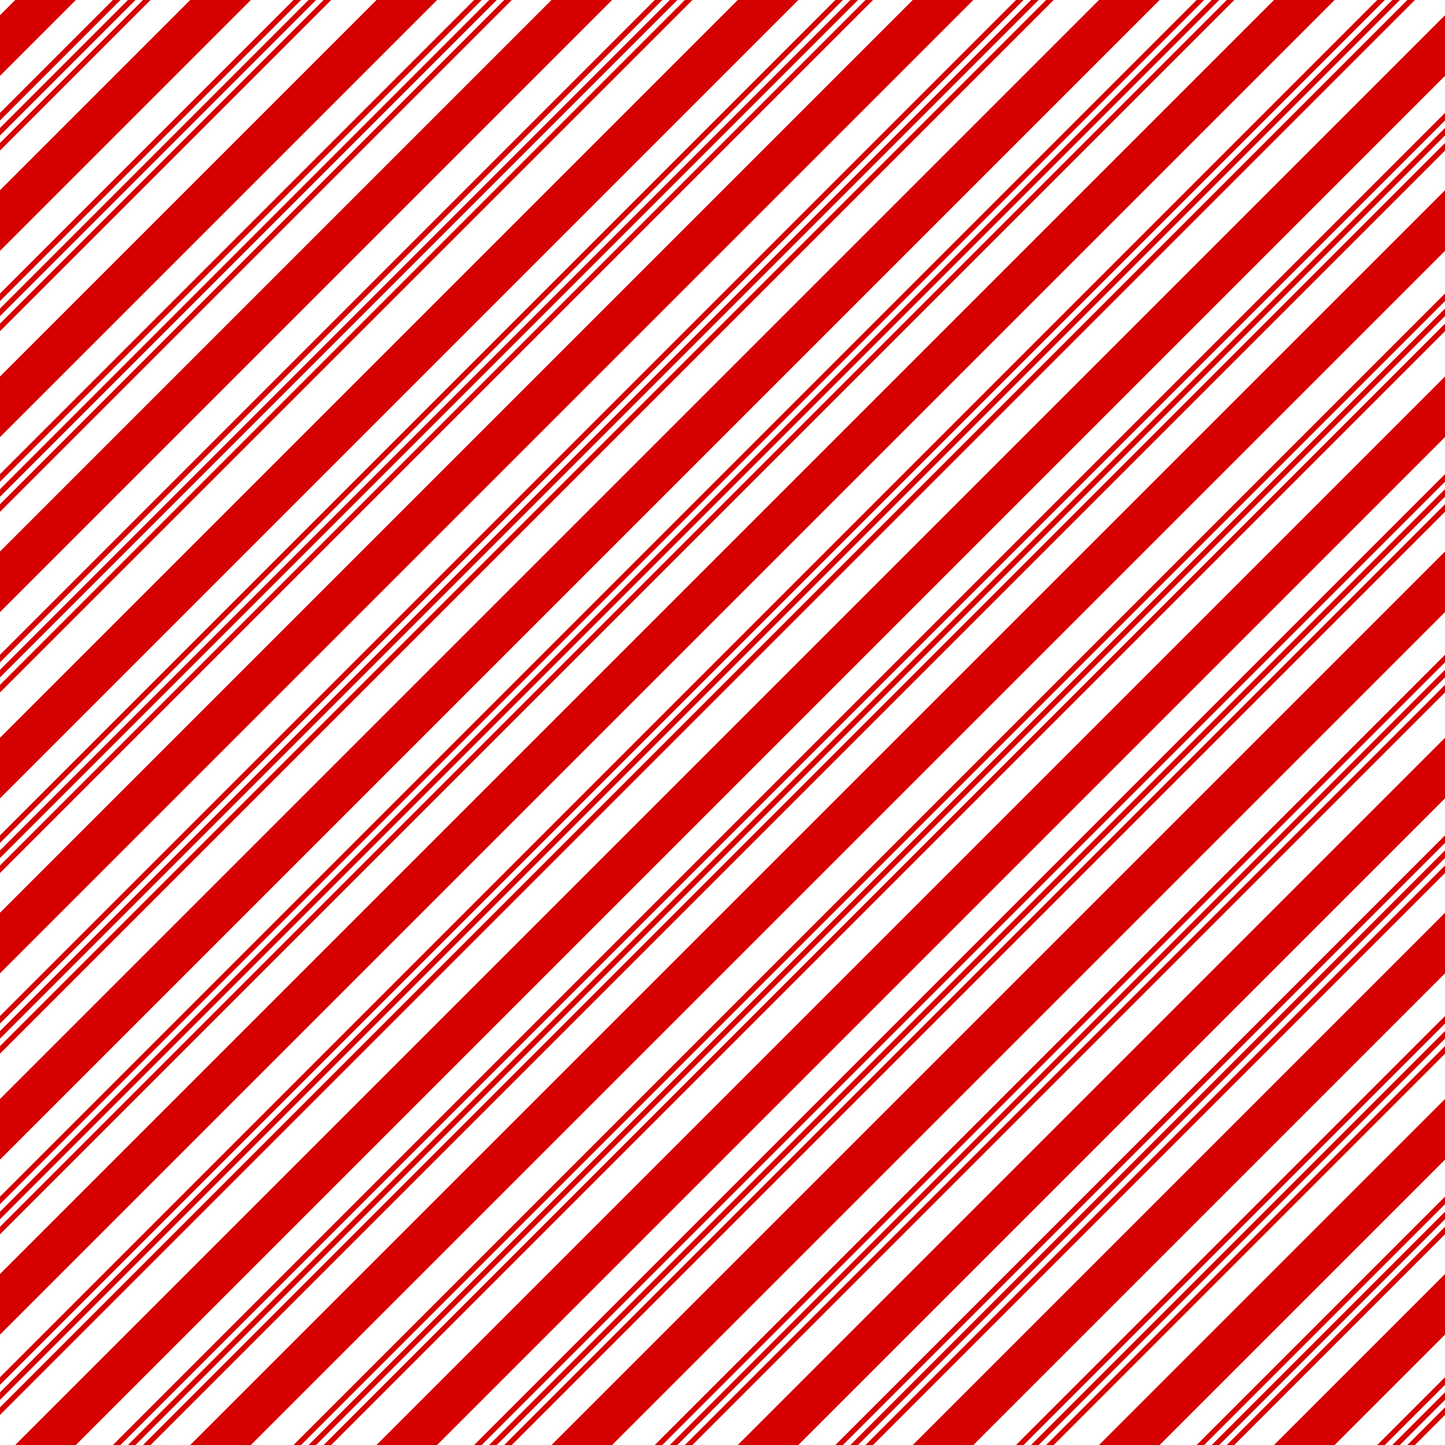 Candy Cane Stripes - Red Stripes 002